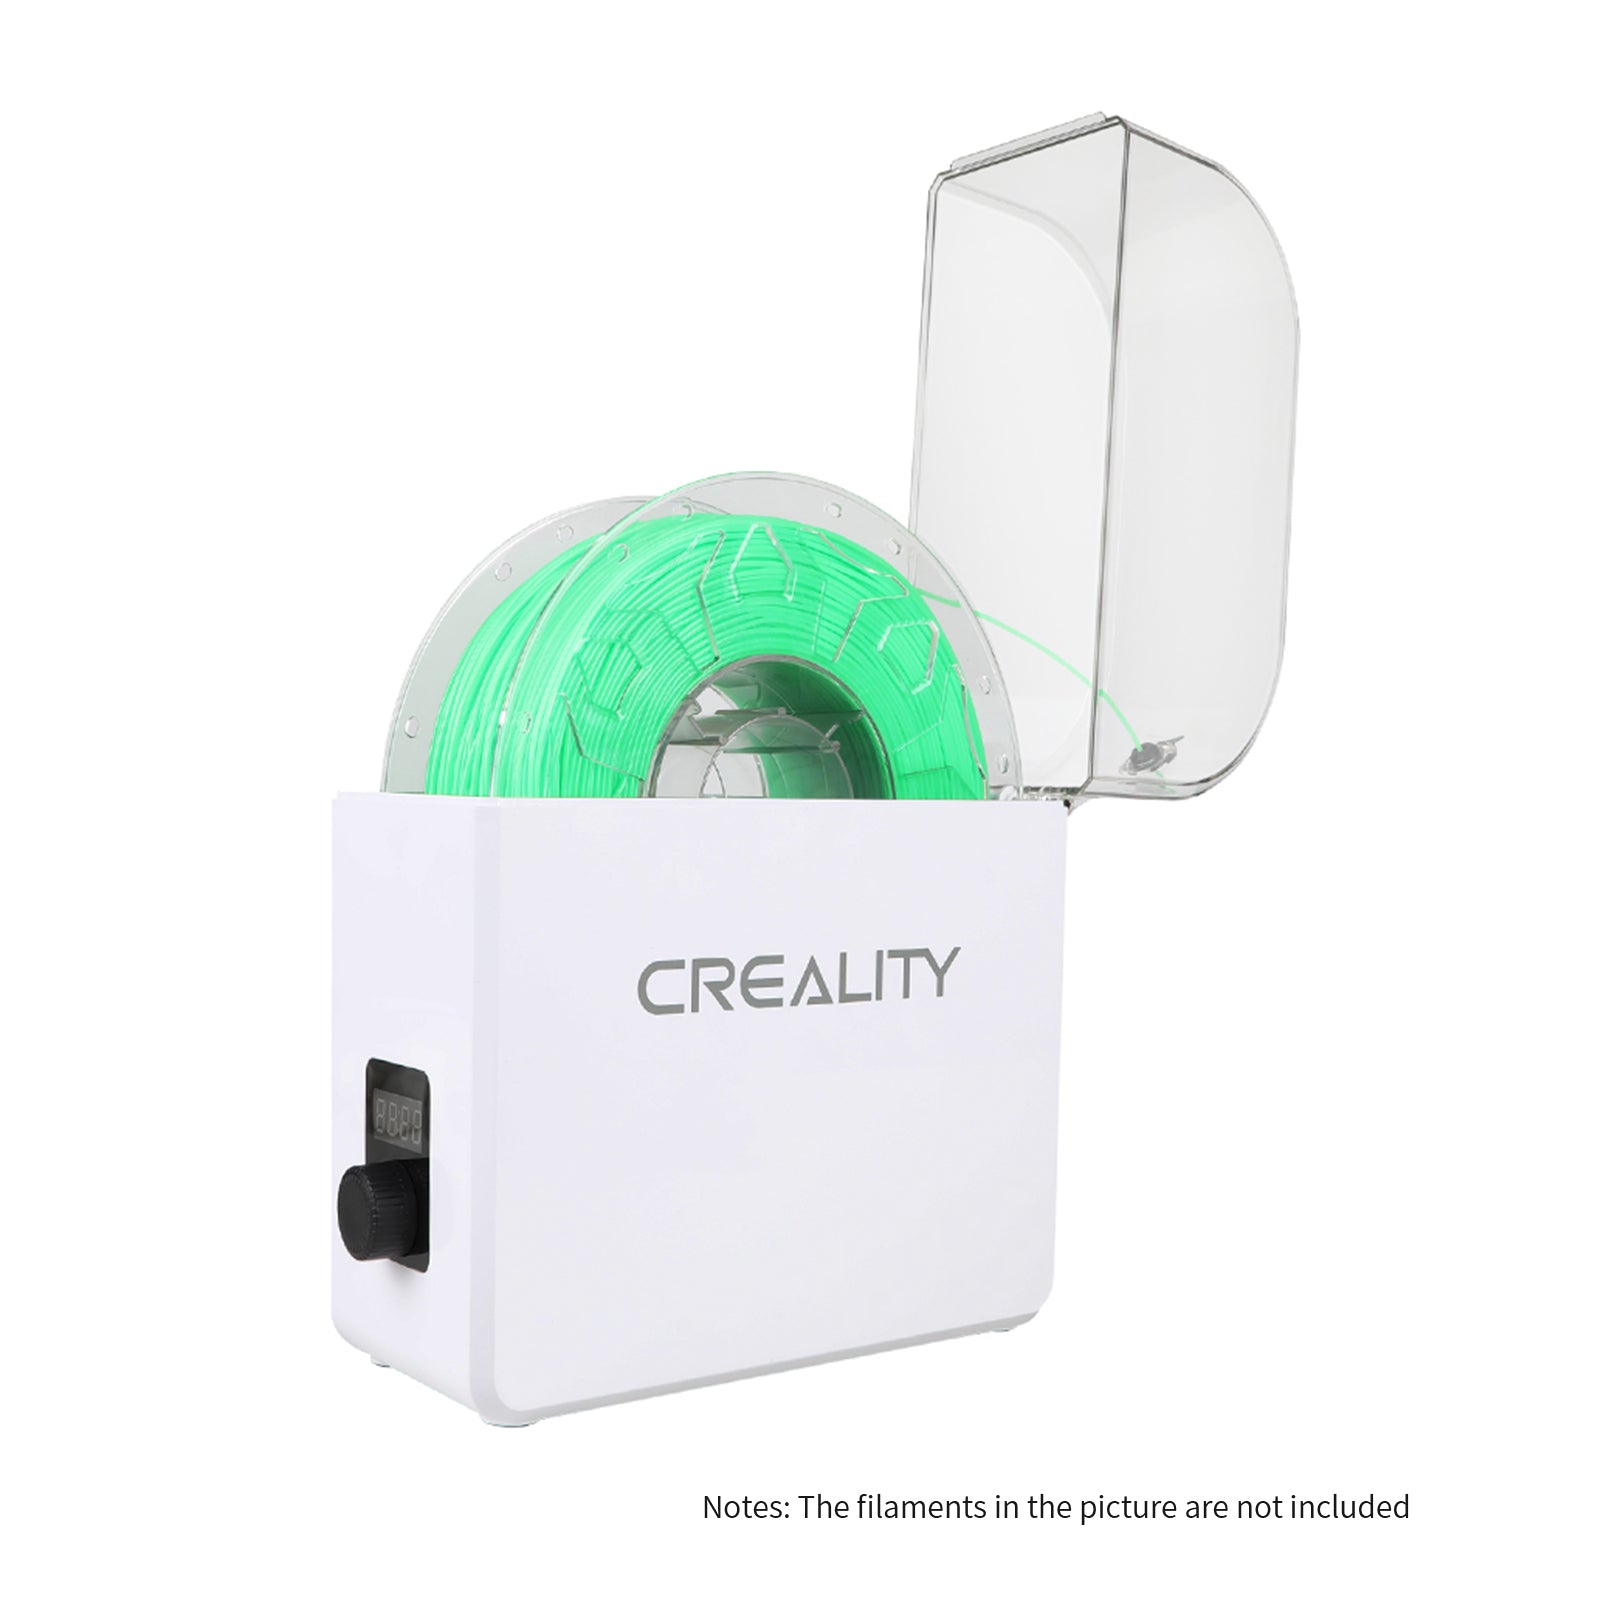 Creality 3D Printer Filament Dry Box - Printing Filament Dryer, Storage Box, Spool Holder, Time Adjustment, LCD Display, Dust-proof Moisture-proof for 1Kg Filament Printing Material Protection